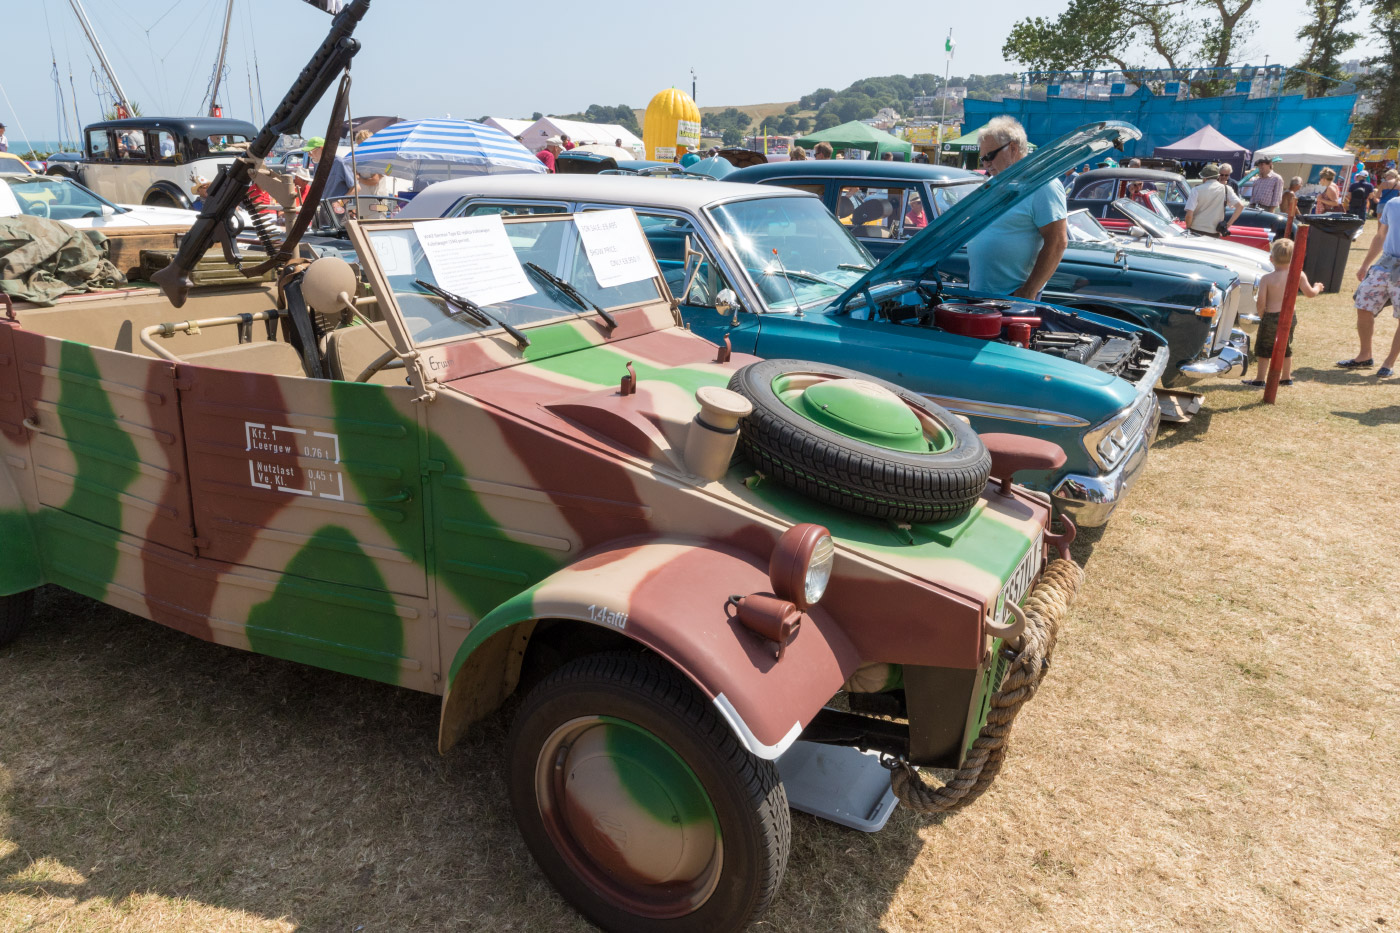 Classic Car show at Swanage Carnival